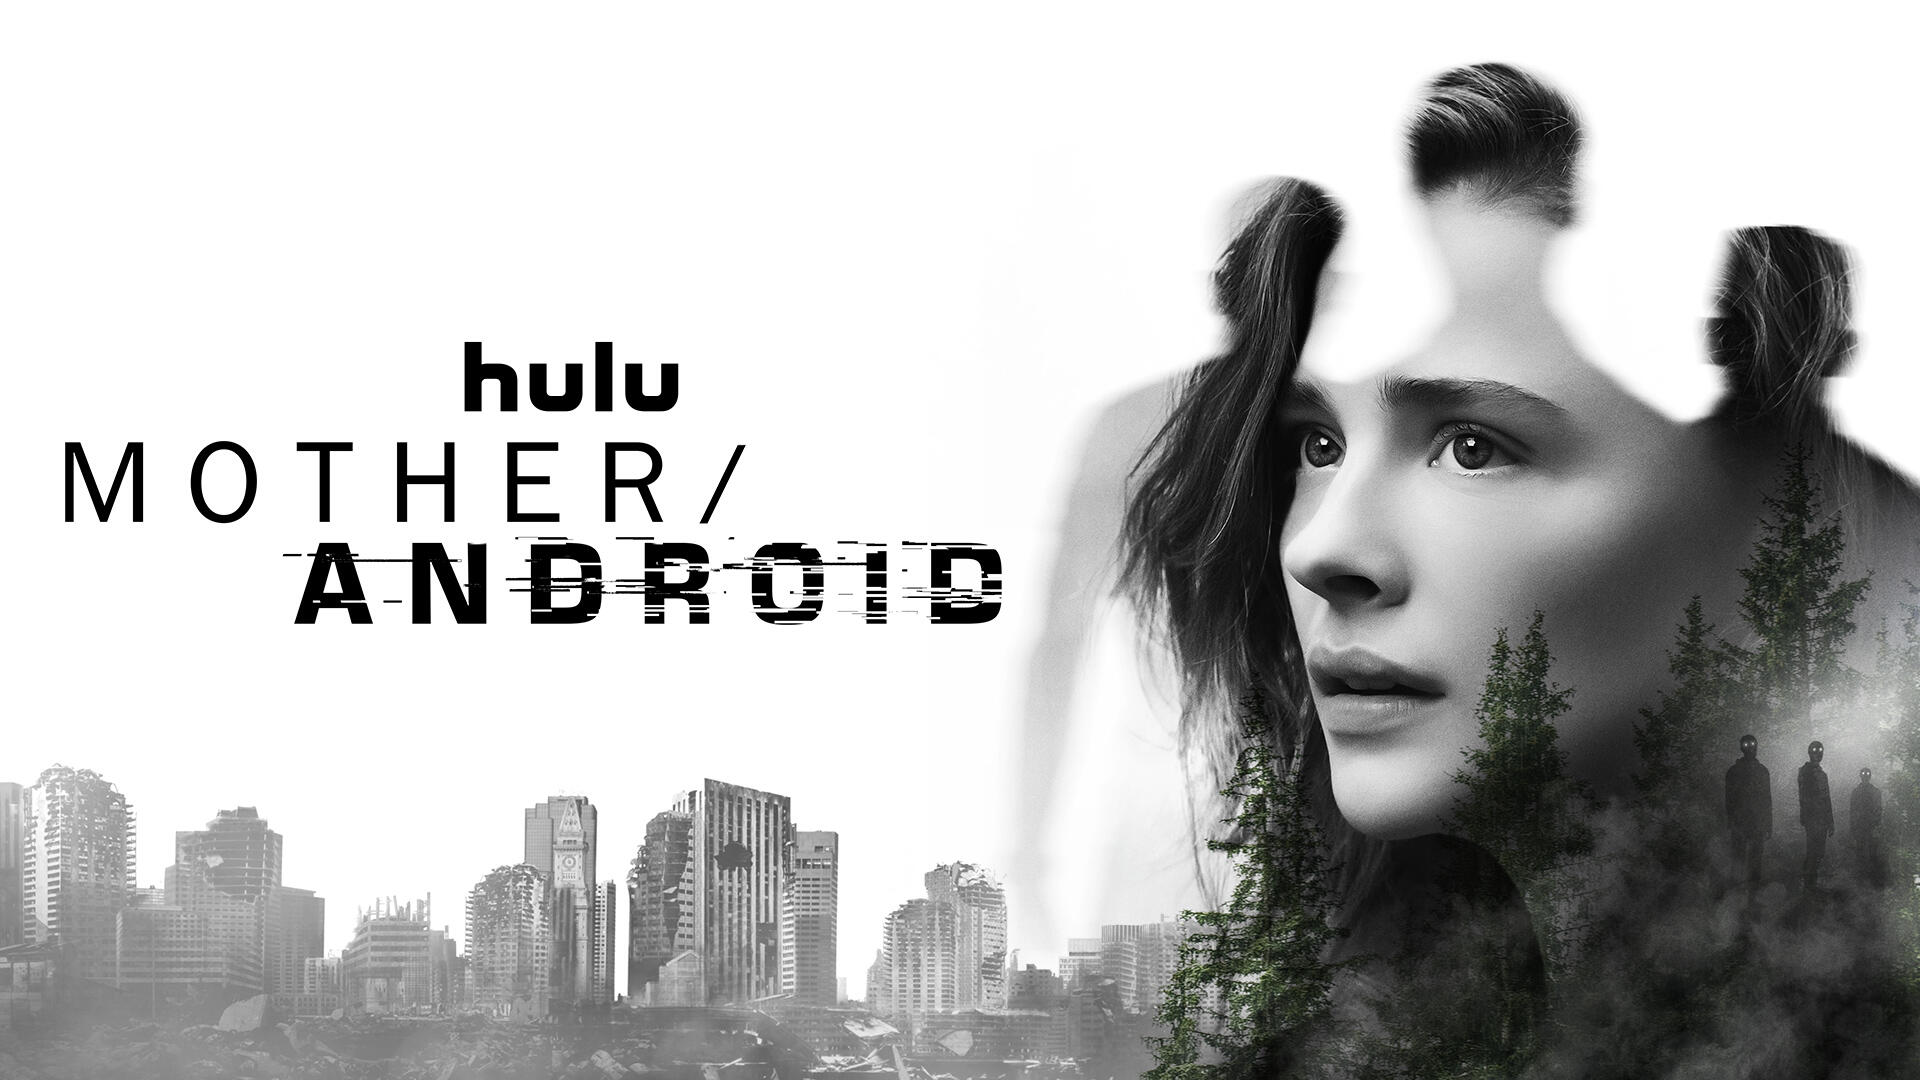 Mother Android Hulu